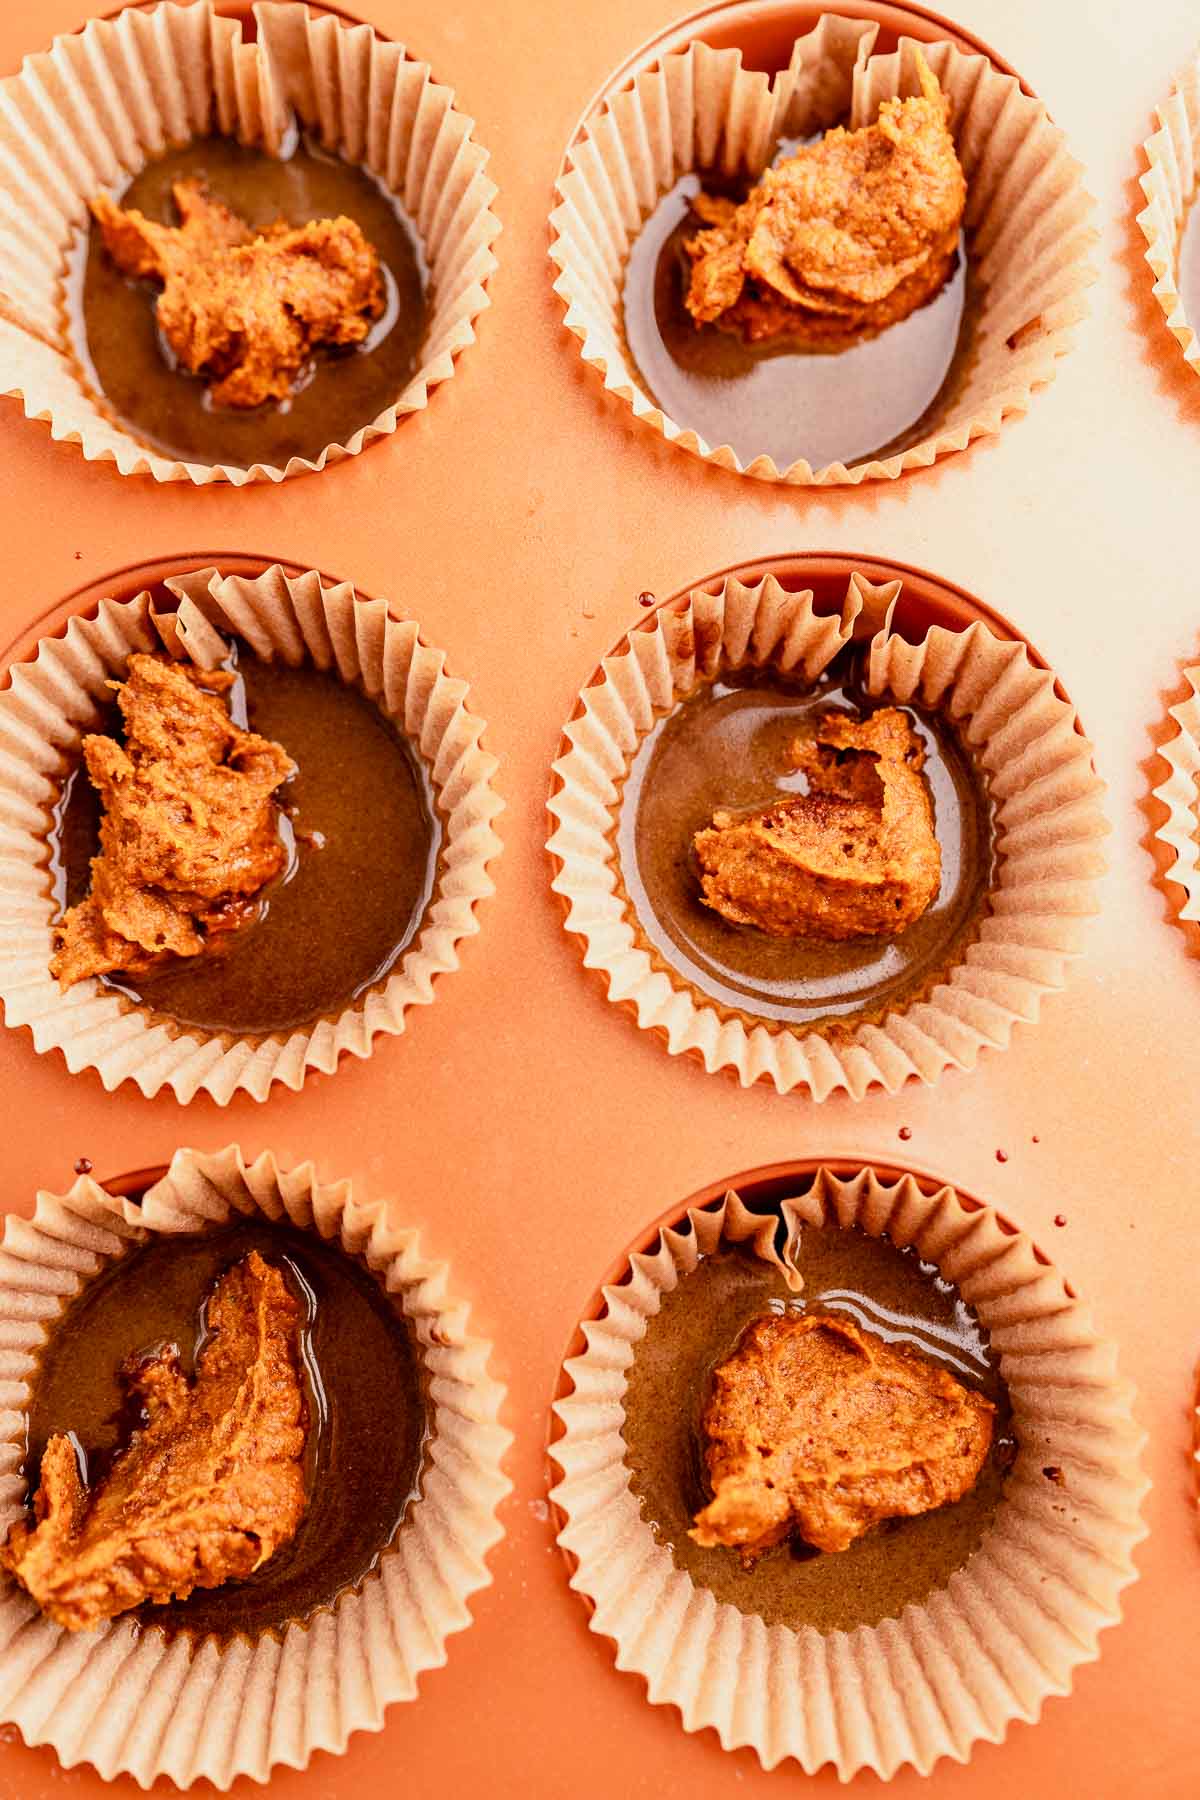 Peanut butter cupcakes in a muffin tin with chocolate almond butter cups.